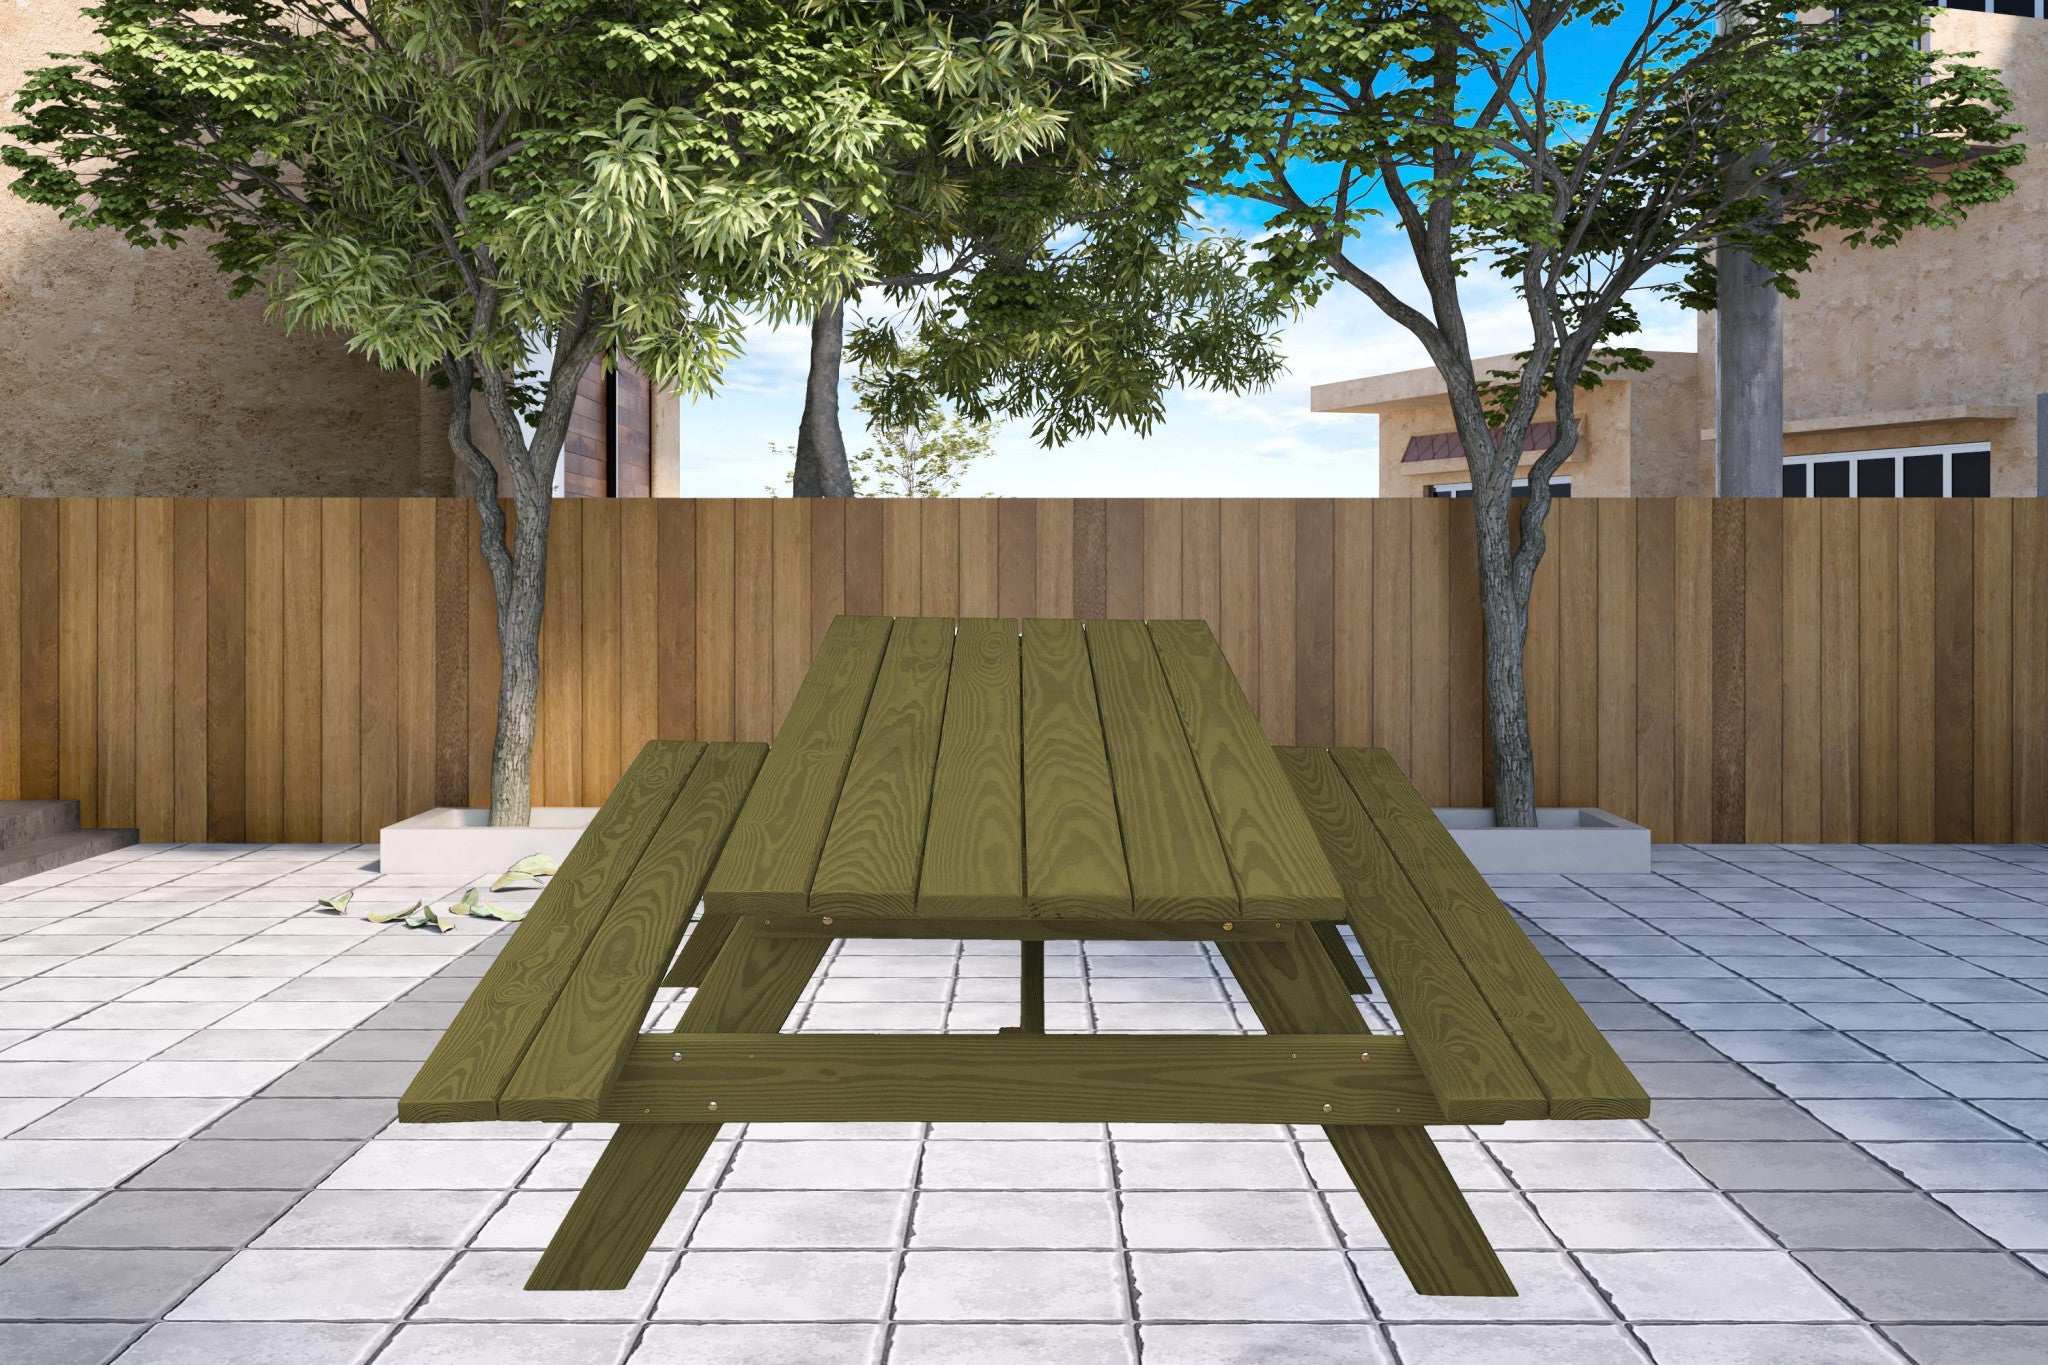 94" Green Solid Wood Outdoor Picnic Table